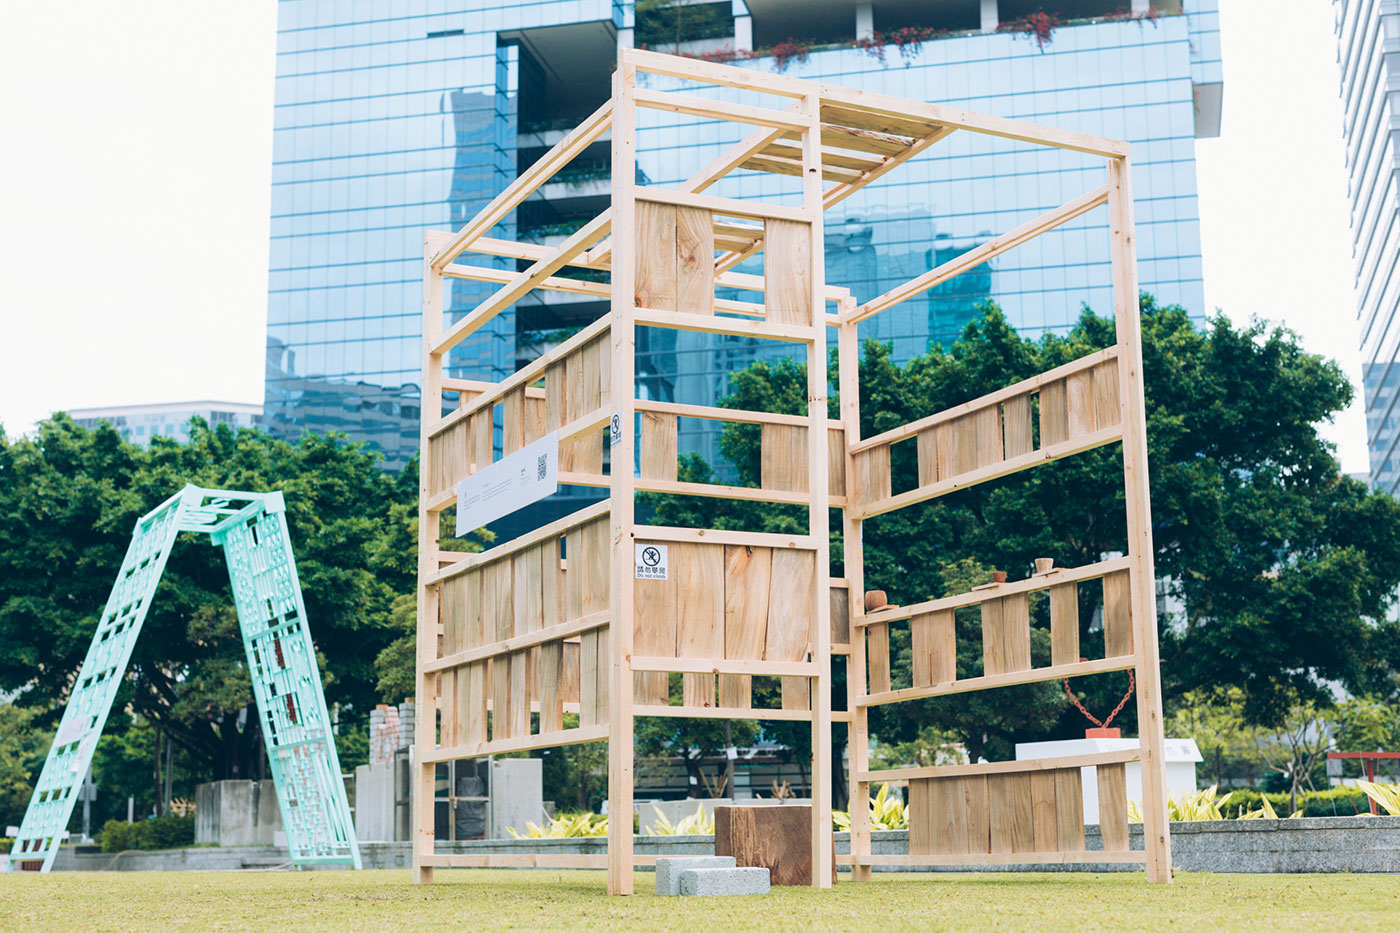 【House】Who would think trees that felling by a typhoon can become strong wood? Turning boards into walls and walls into homes, the wood from these trees unleash a new atmosphere. Where is your home? by: YUNG Wing-yan, Founder of Chingchun Warehouse and Coutou Woodworking Studio